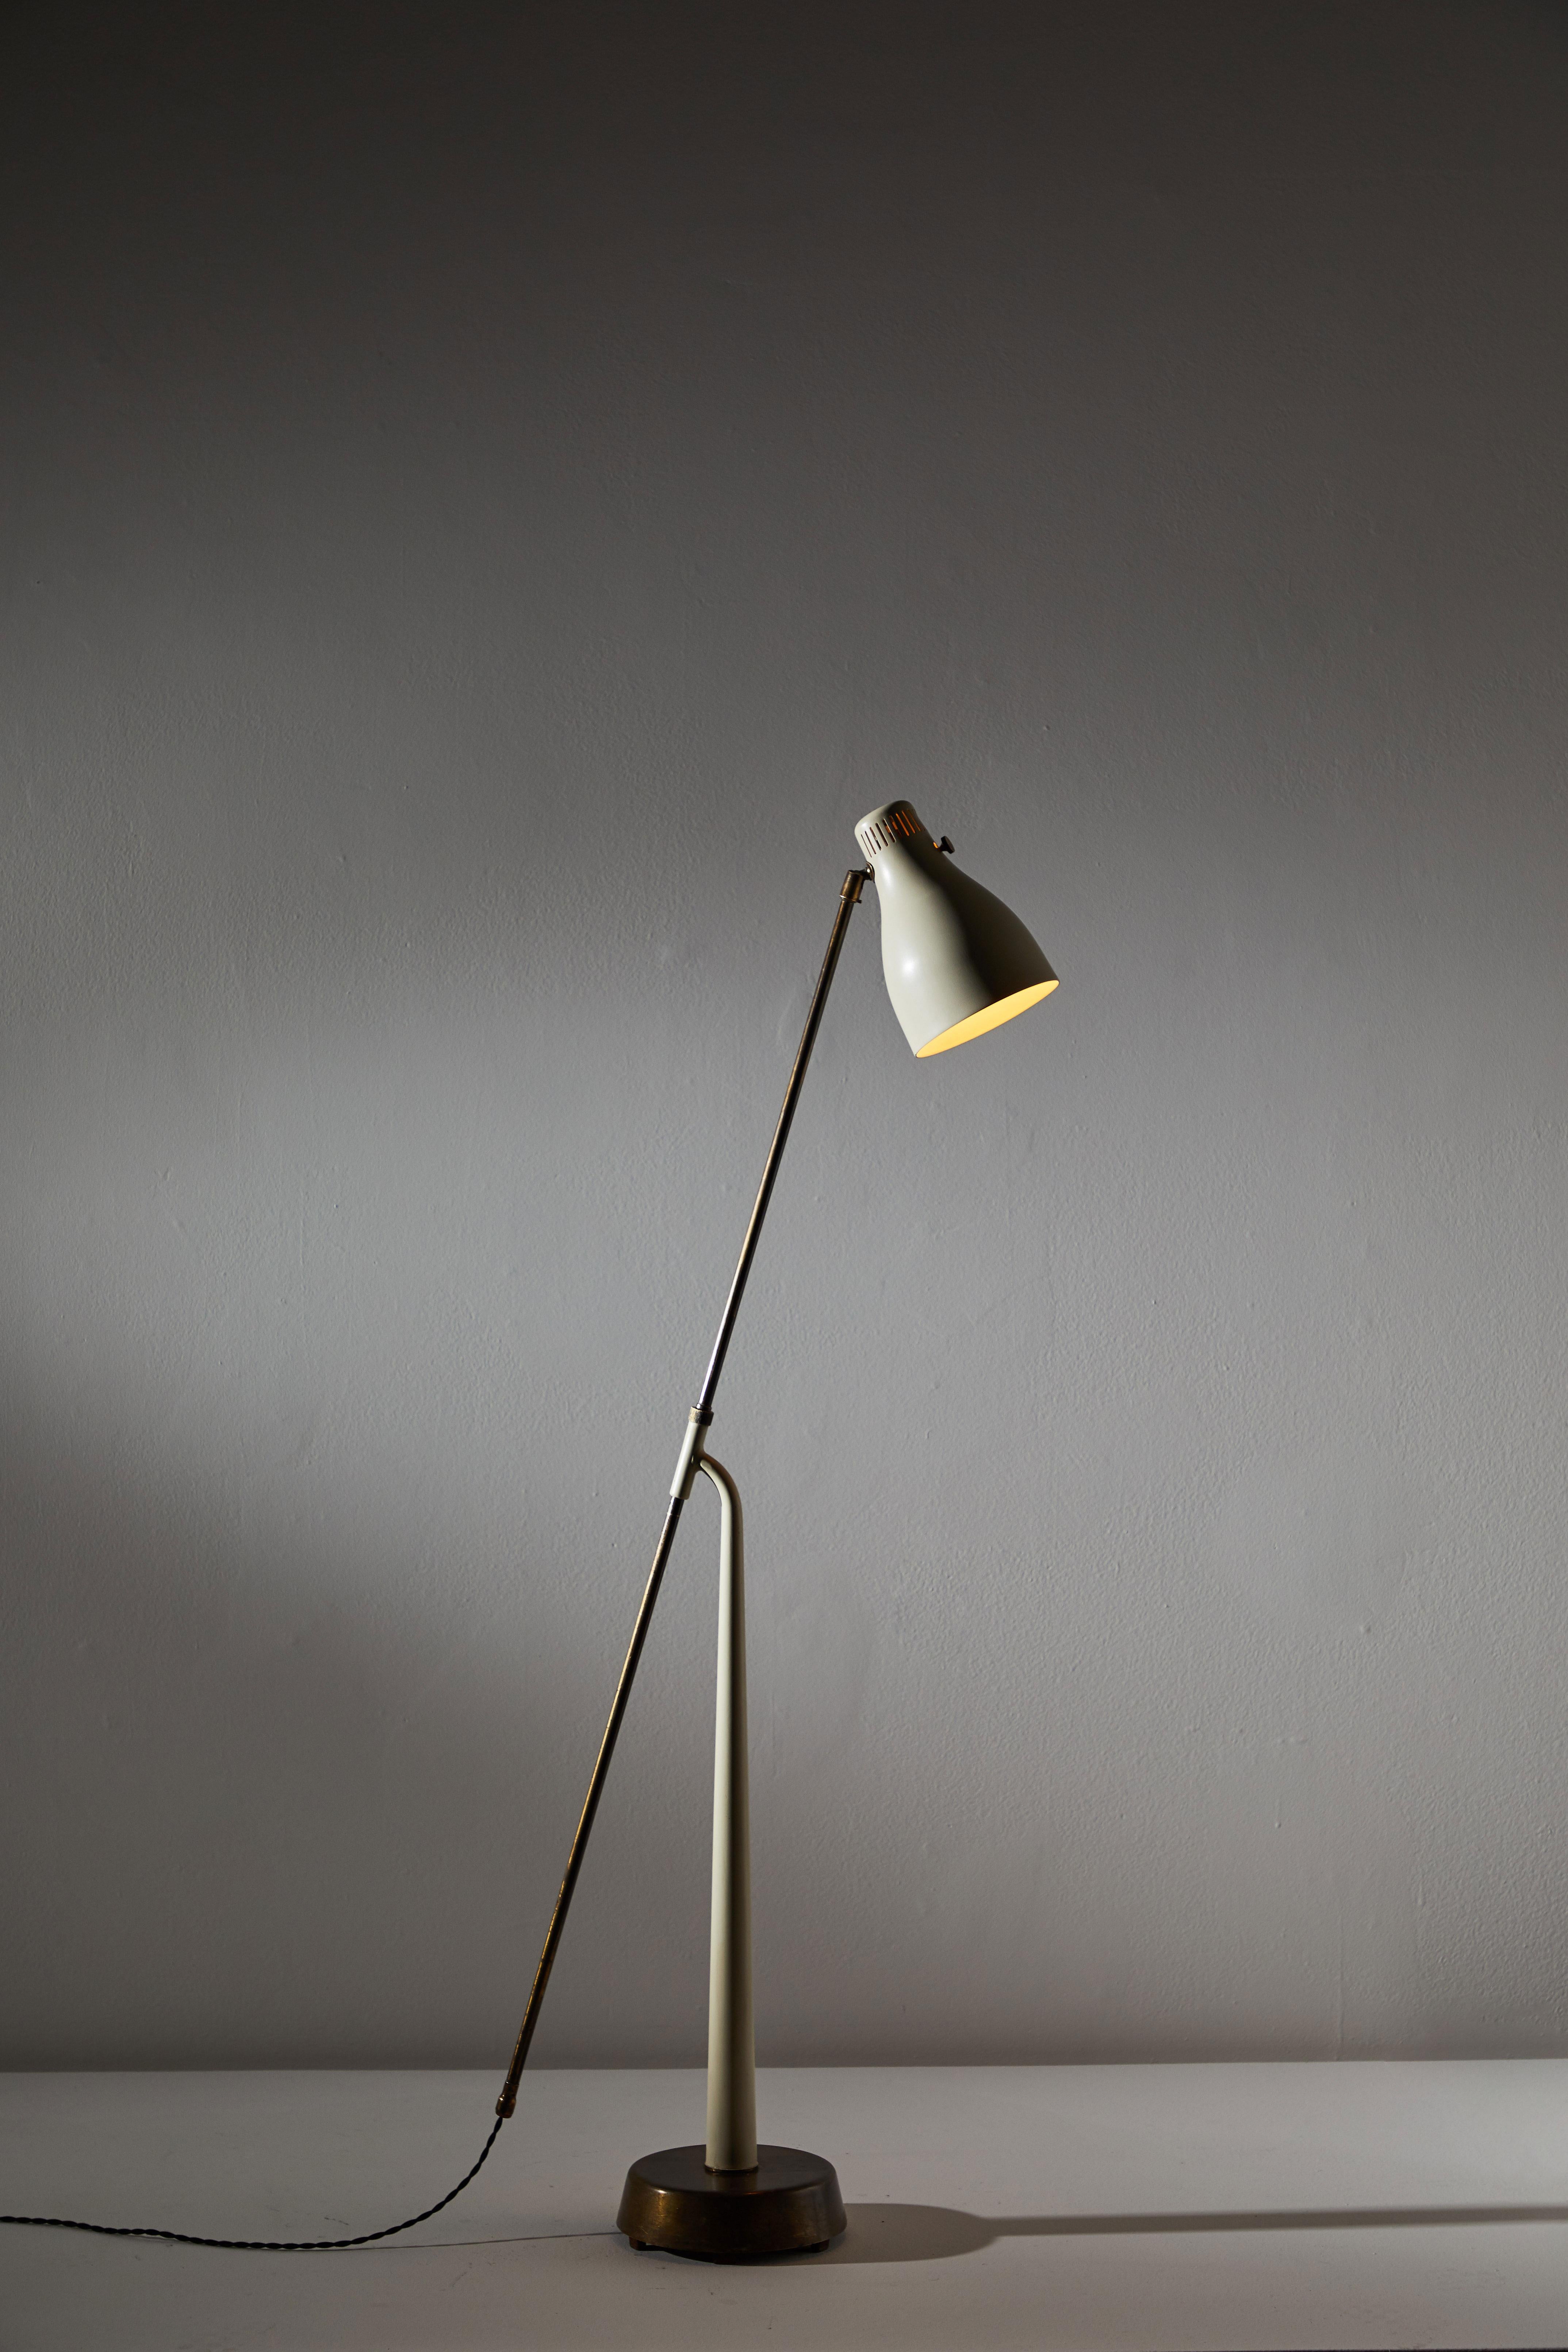 Model 541 floor lamp by Hans Bergstrom for Atelje Lyktan. Designed and manufactured in Sweden, 1945. Rare metal enameled shade version. Brass hardware. Arm and shade are adjustable. Rewired with black French twist cord. Takes one E27 75w maximum